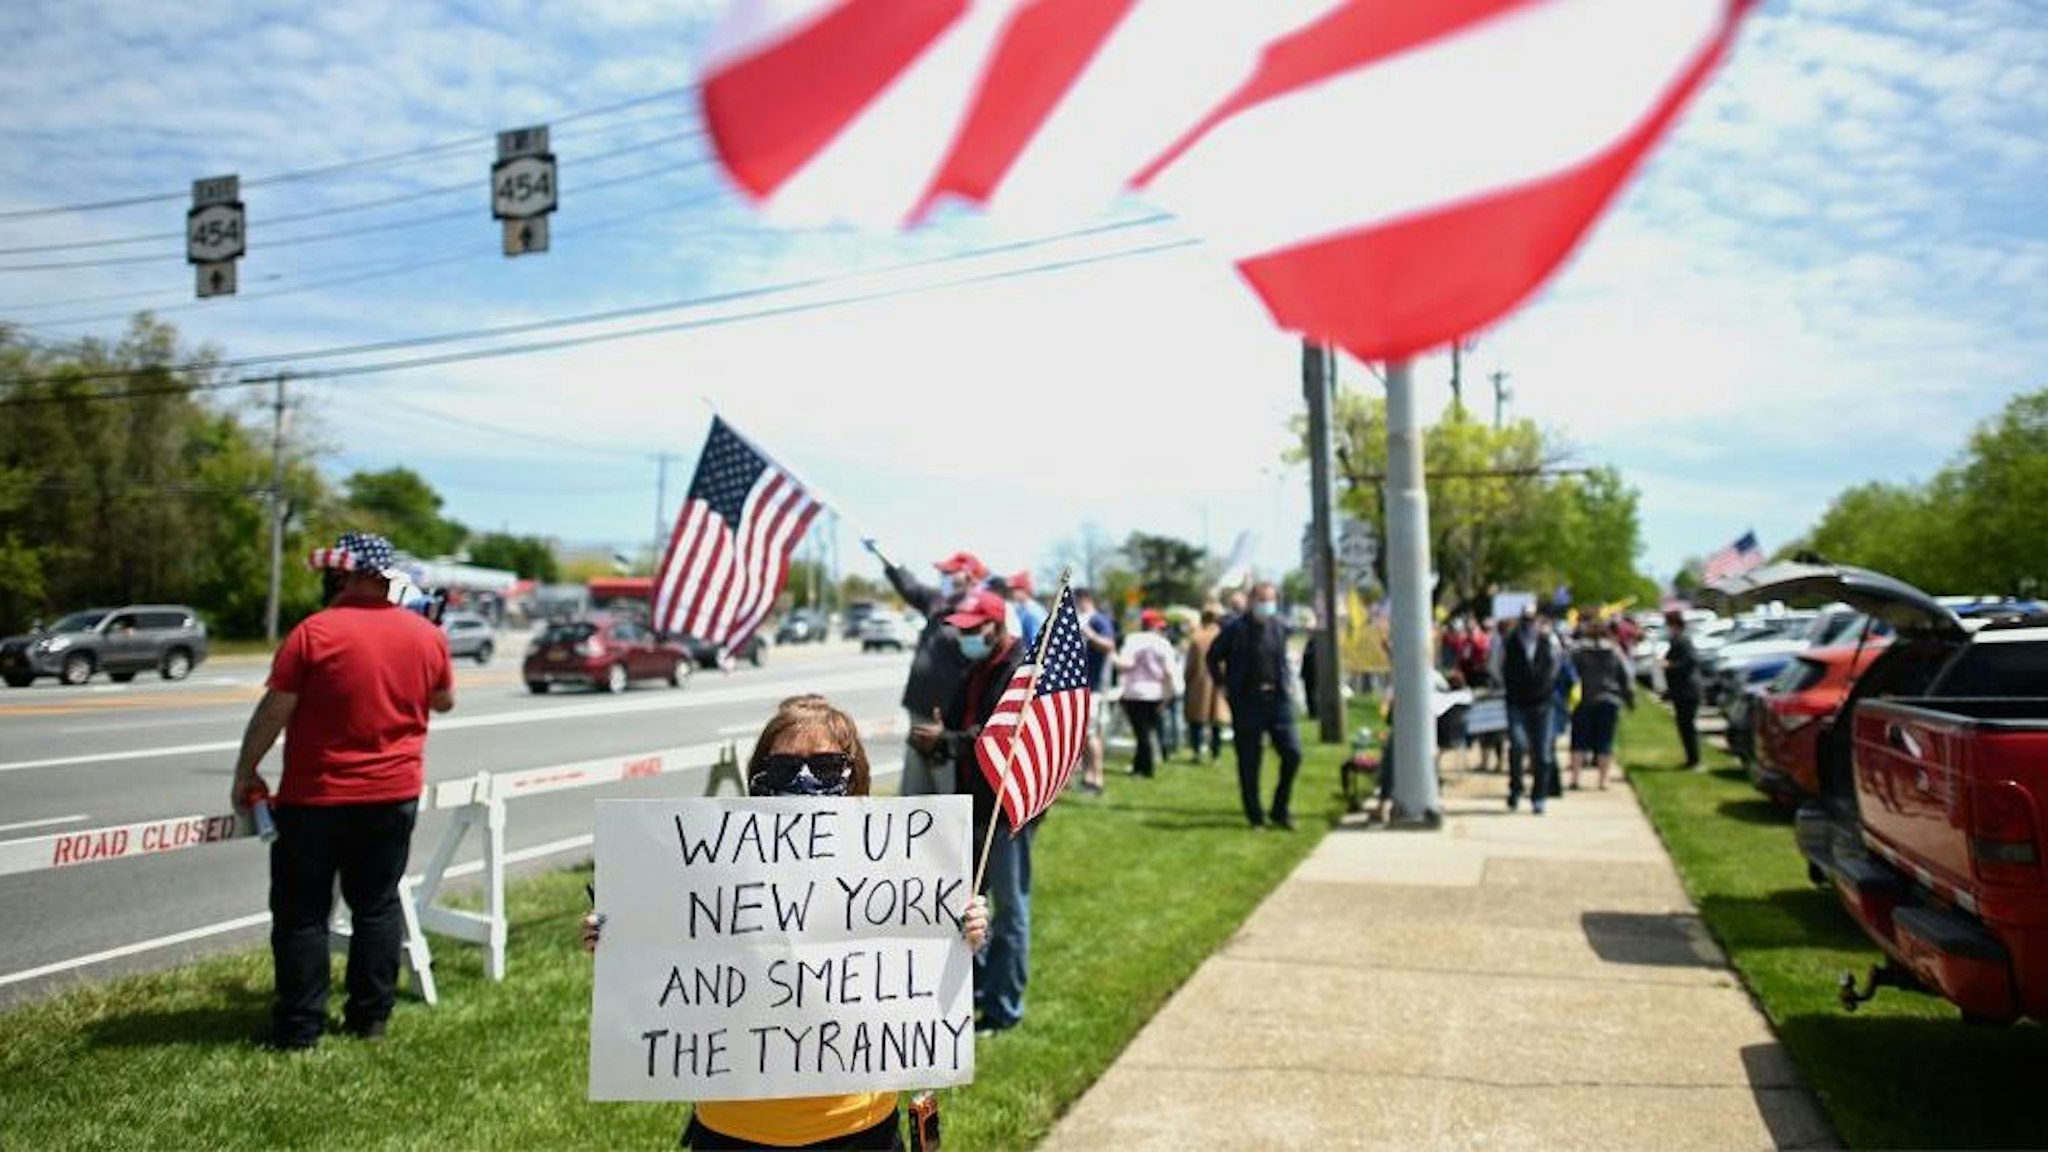 Protestors wave US flags as they attend an "Open New York" Rally on May 14, 2020 in Commack, on Long Island, New York. (Photo by Johannes EISELE / AFP)